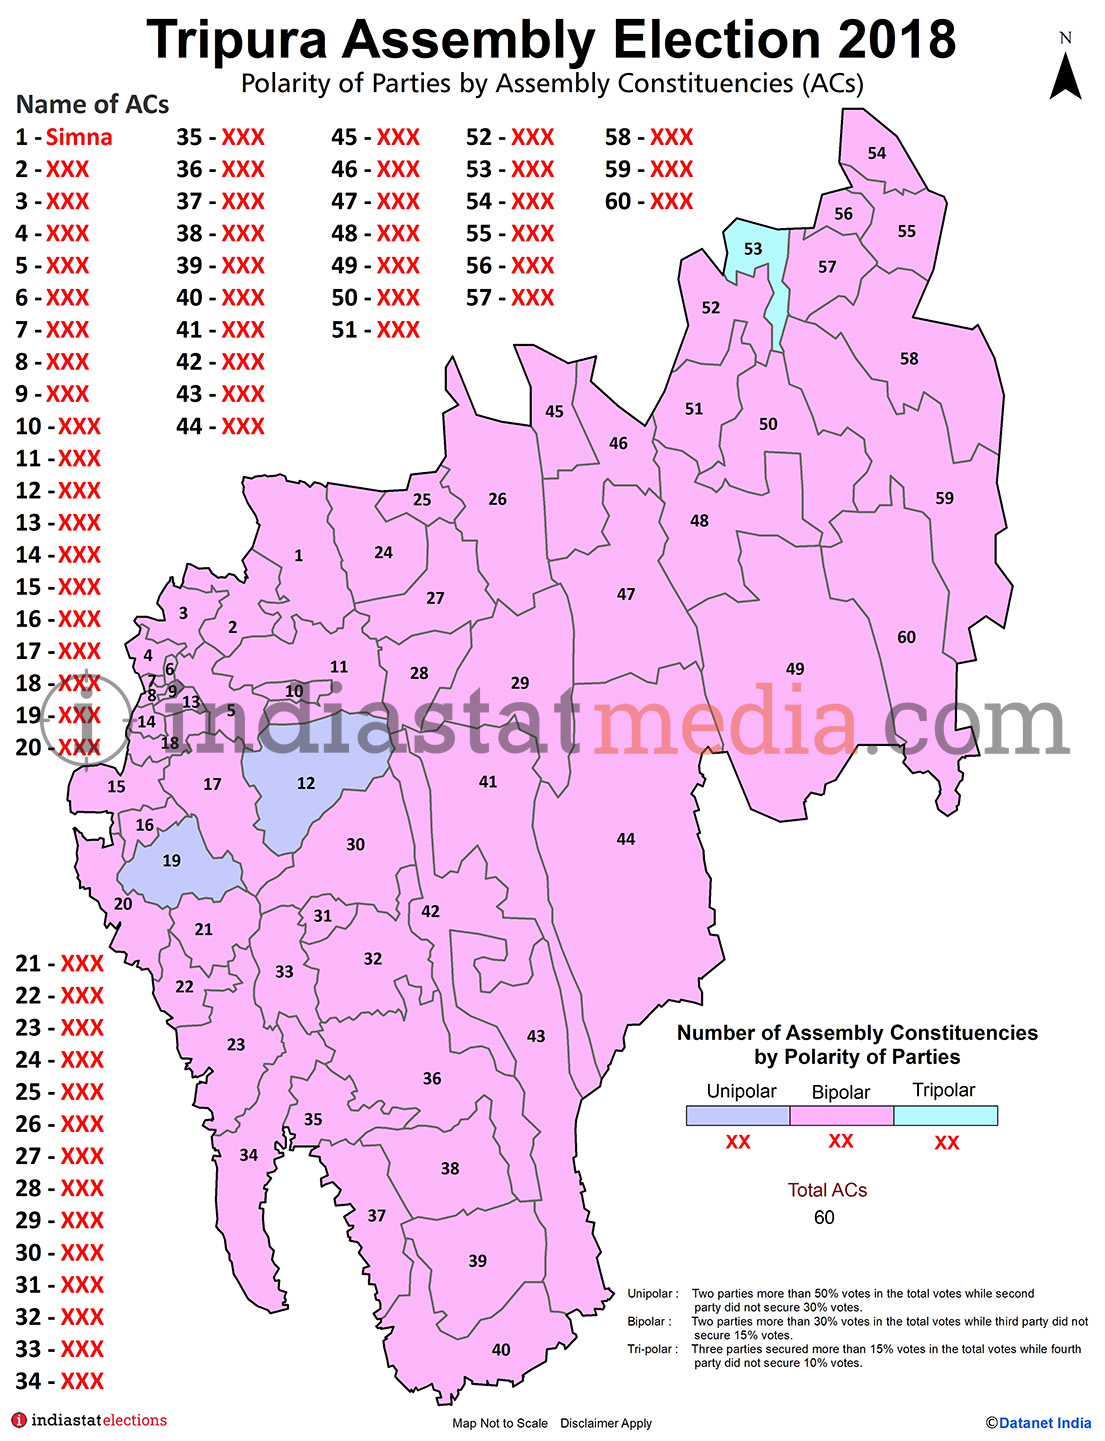 Polarity of Parties by Assembly Constituencies in Tripura (Assembly Election - 2018)